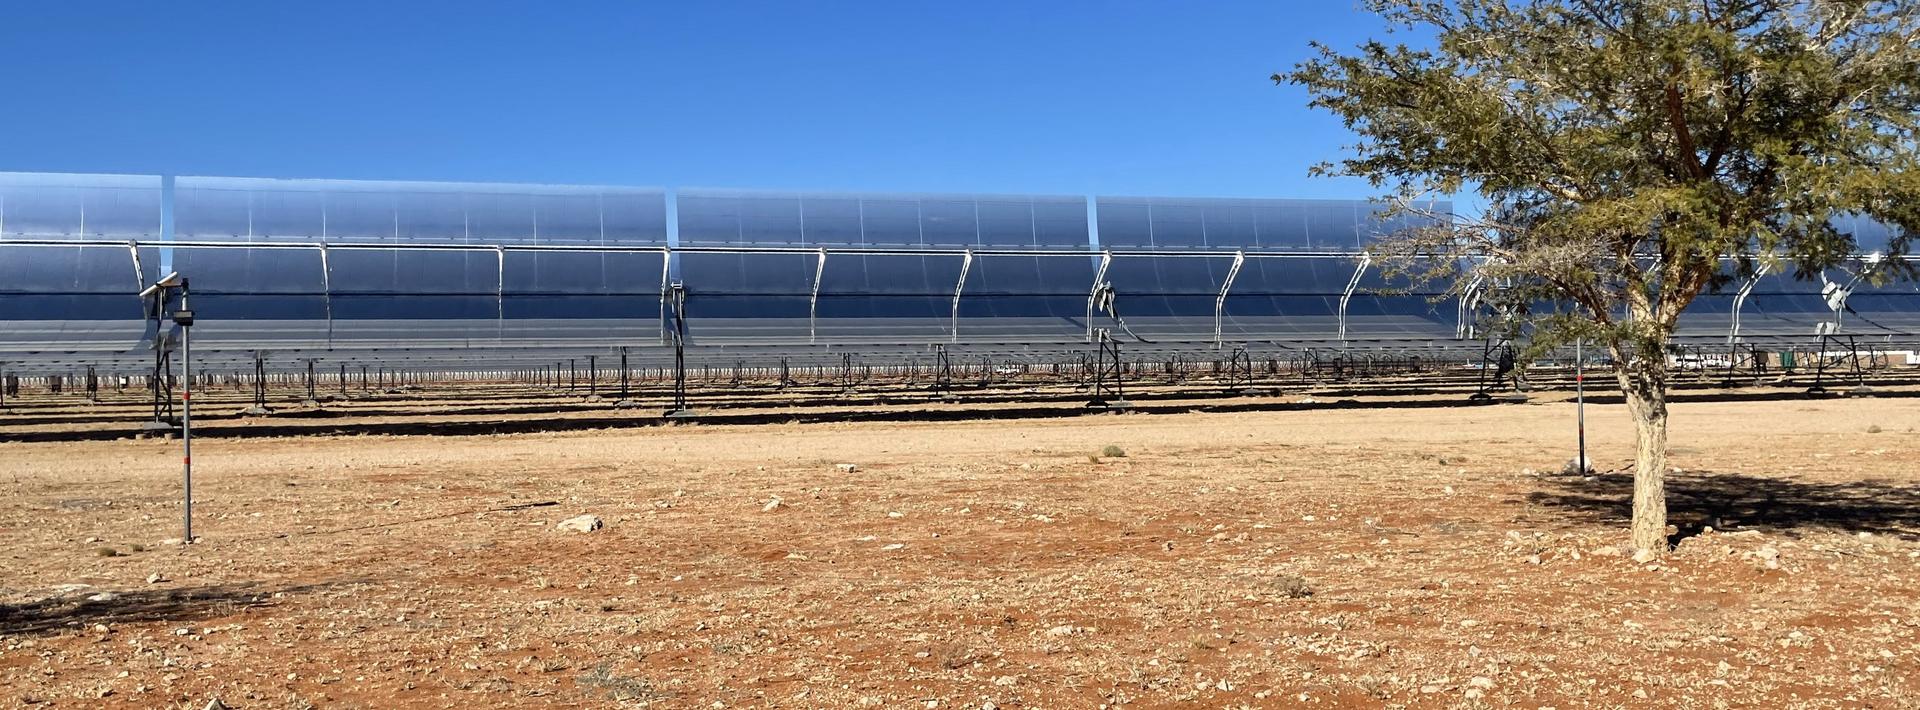 Solar power panels on a sunny day in South Africa